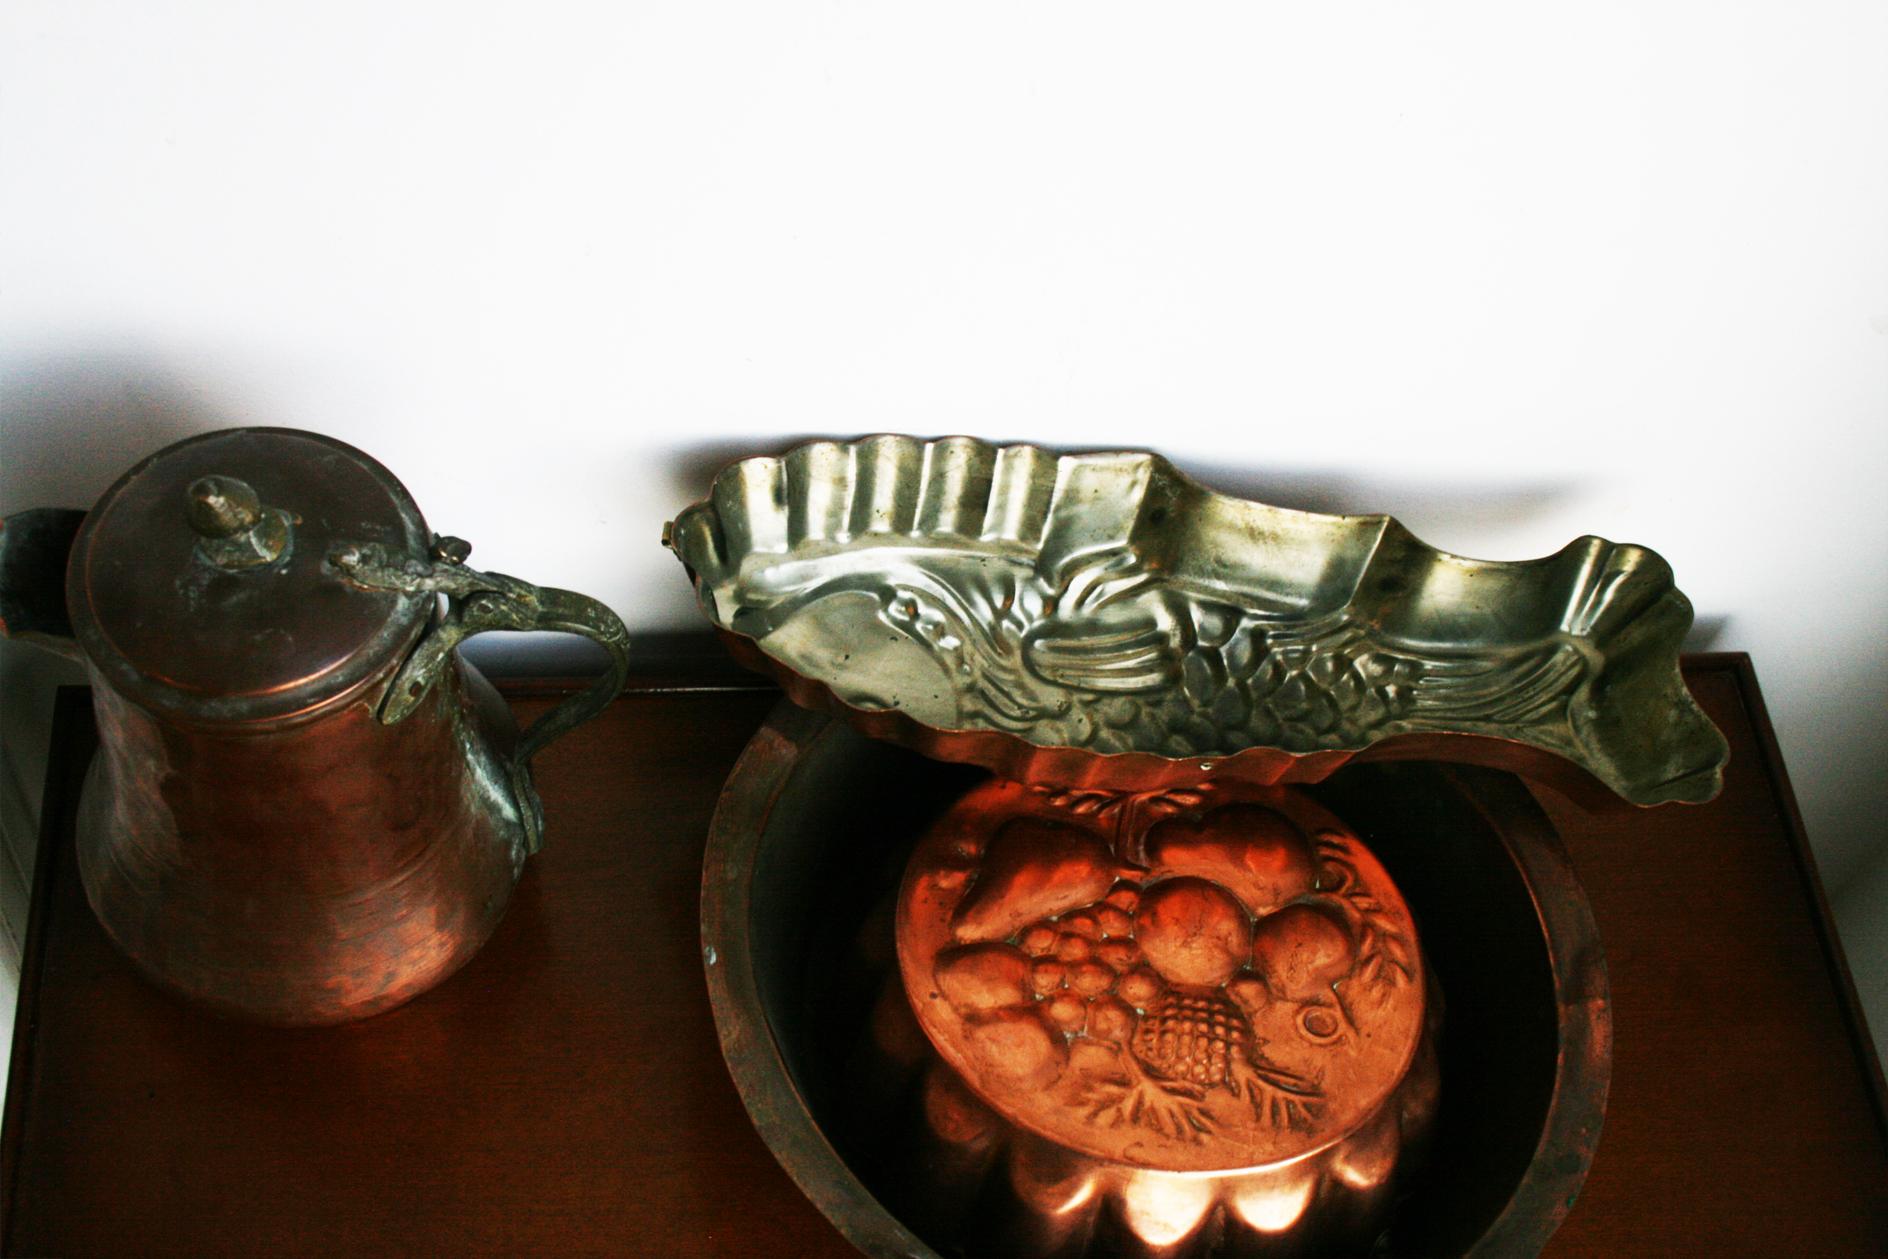 Lot Old Copper Molds and Utensils to Decorate Your Kitchen 1